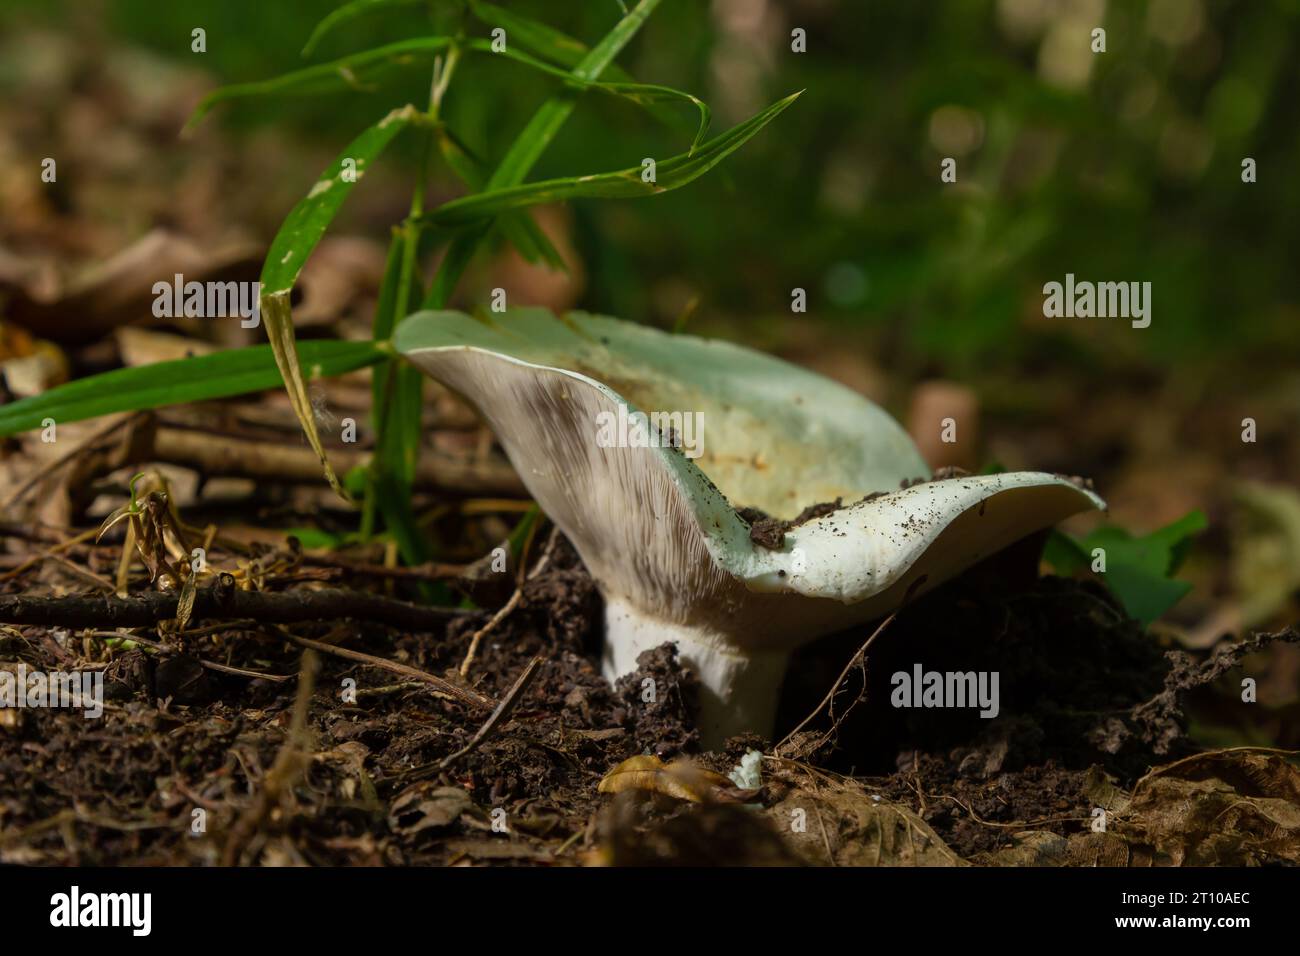 Lactarius vellereus or Lactarius piperatus is large white gilled and edible mushroom with a flat cap common in Europe and America. Stock Photo